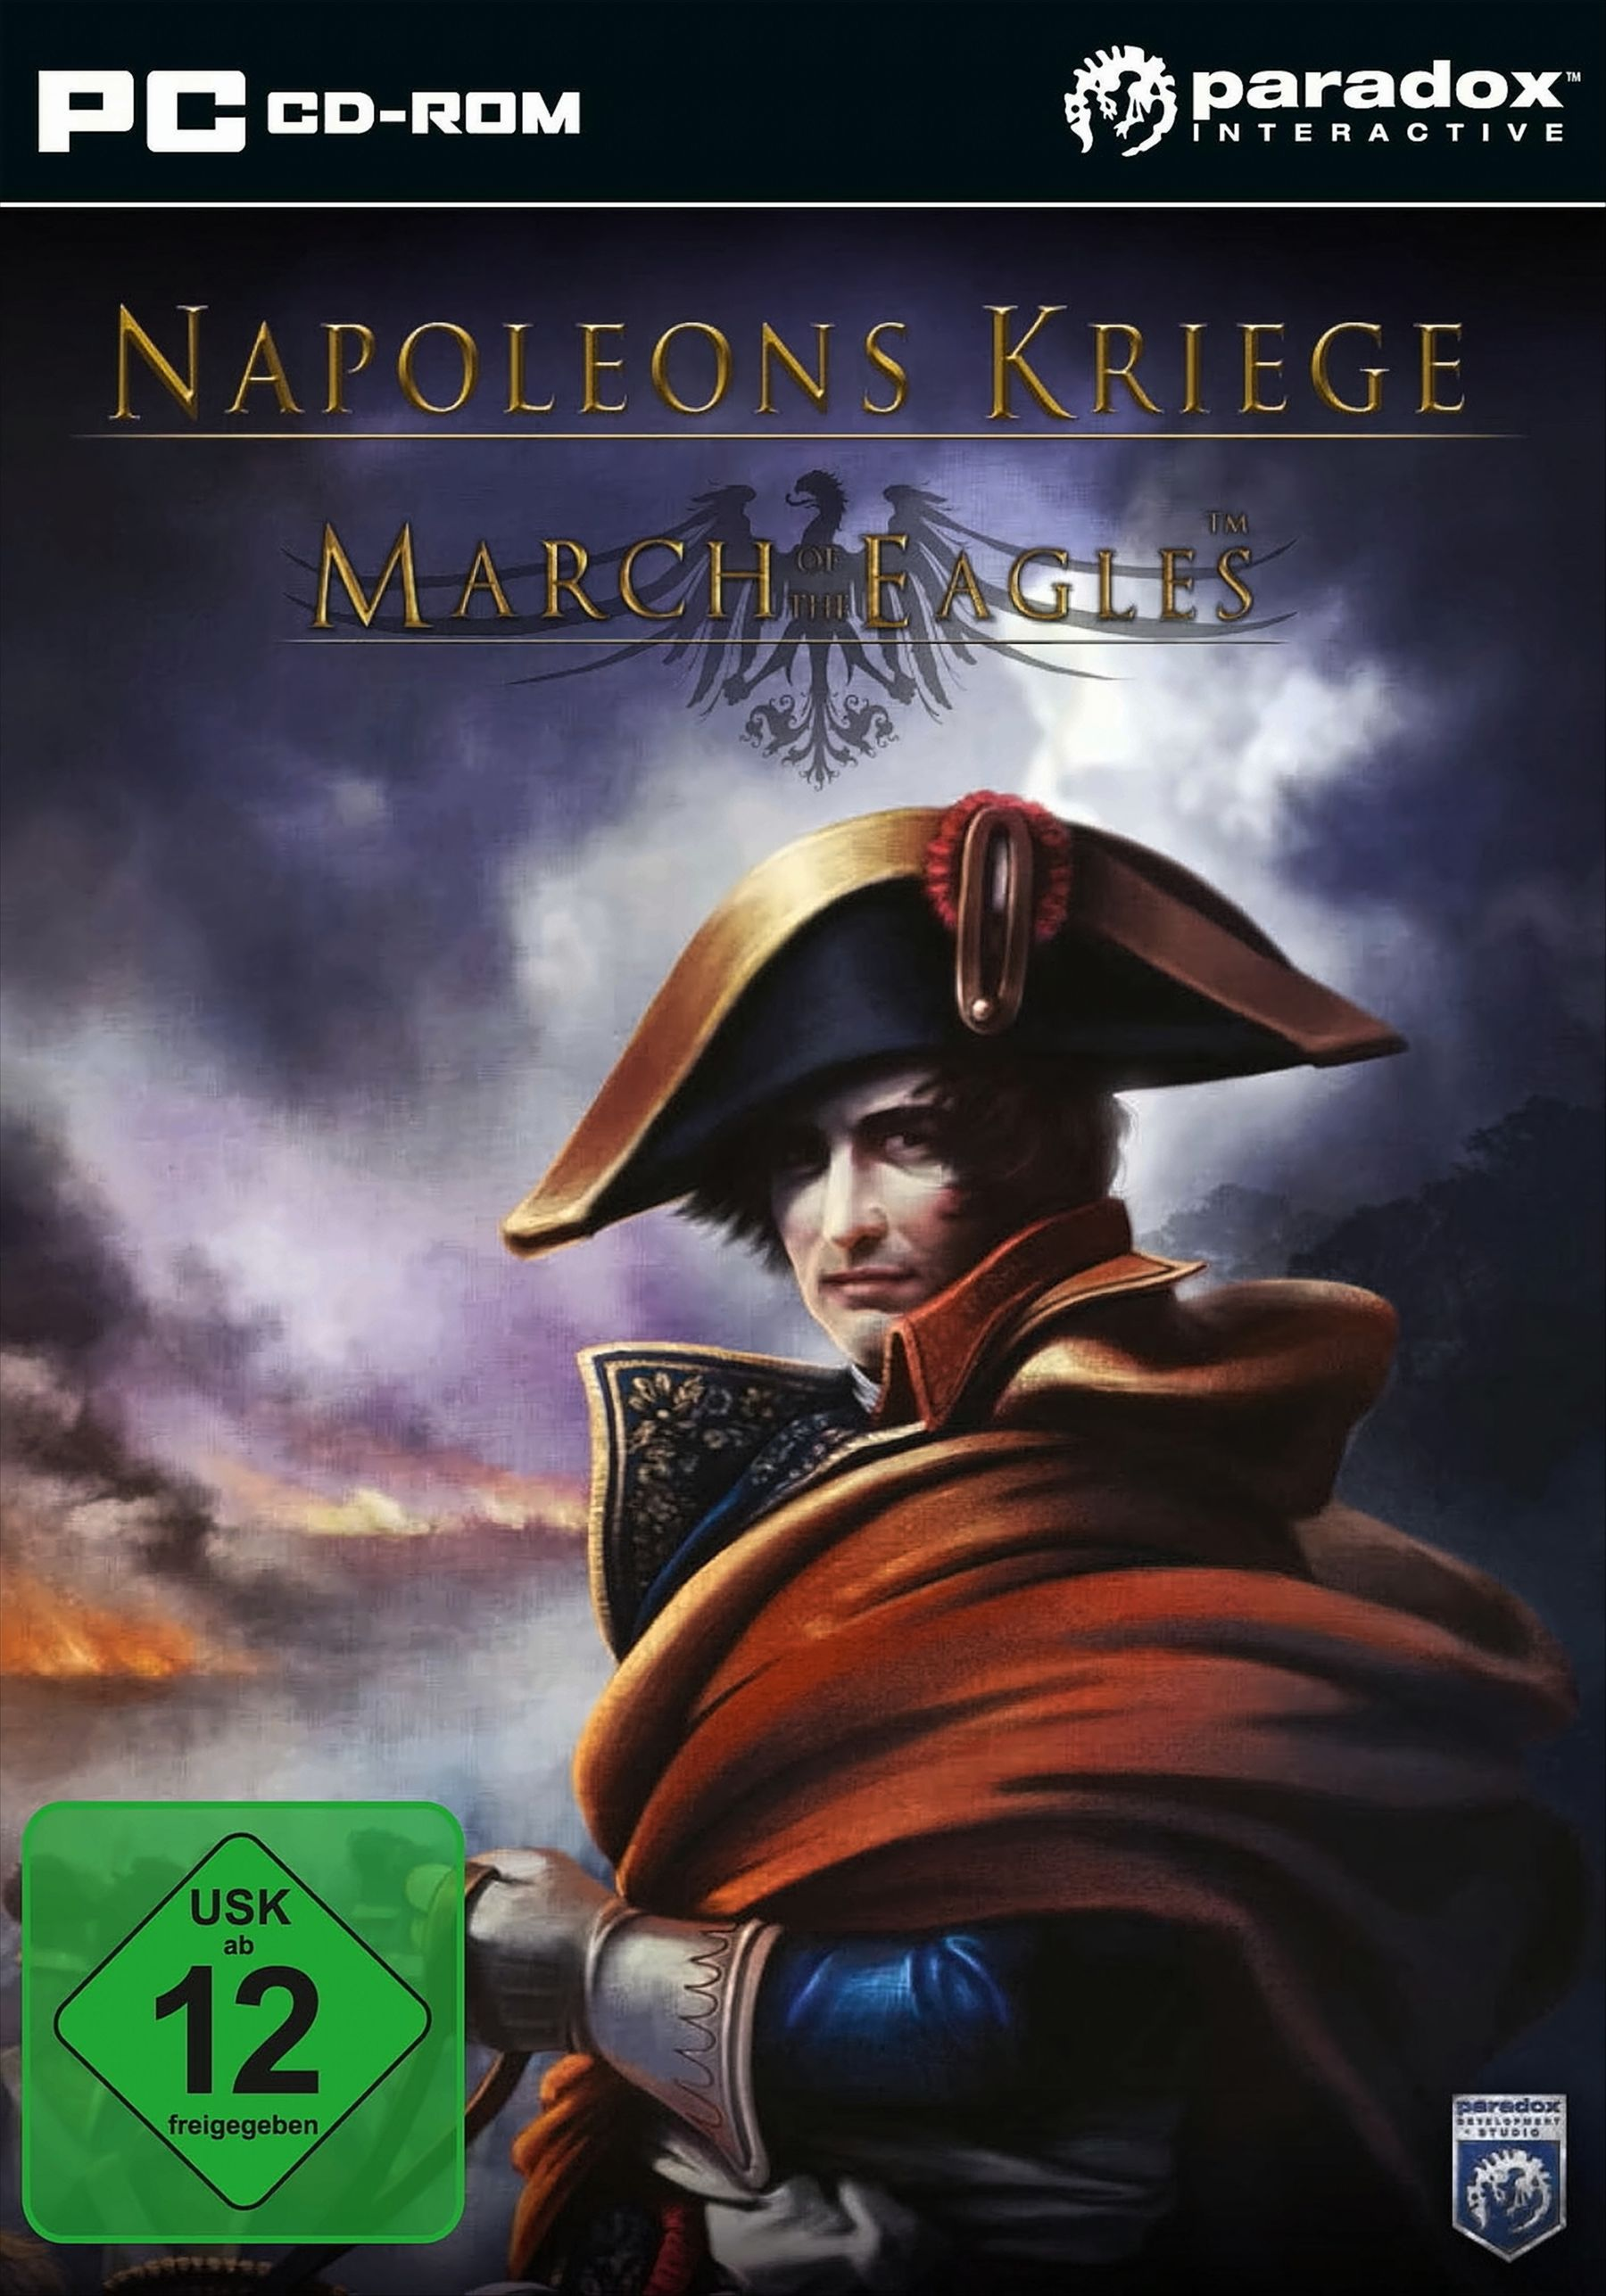 Napoleons Of - The Kriege: [PC] March Eagles